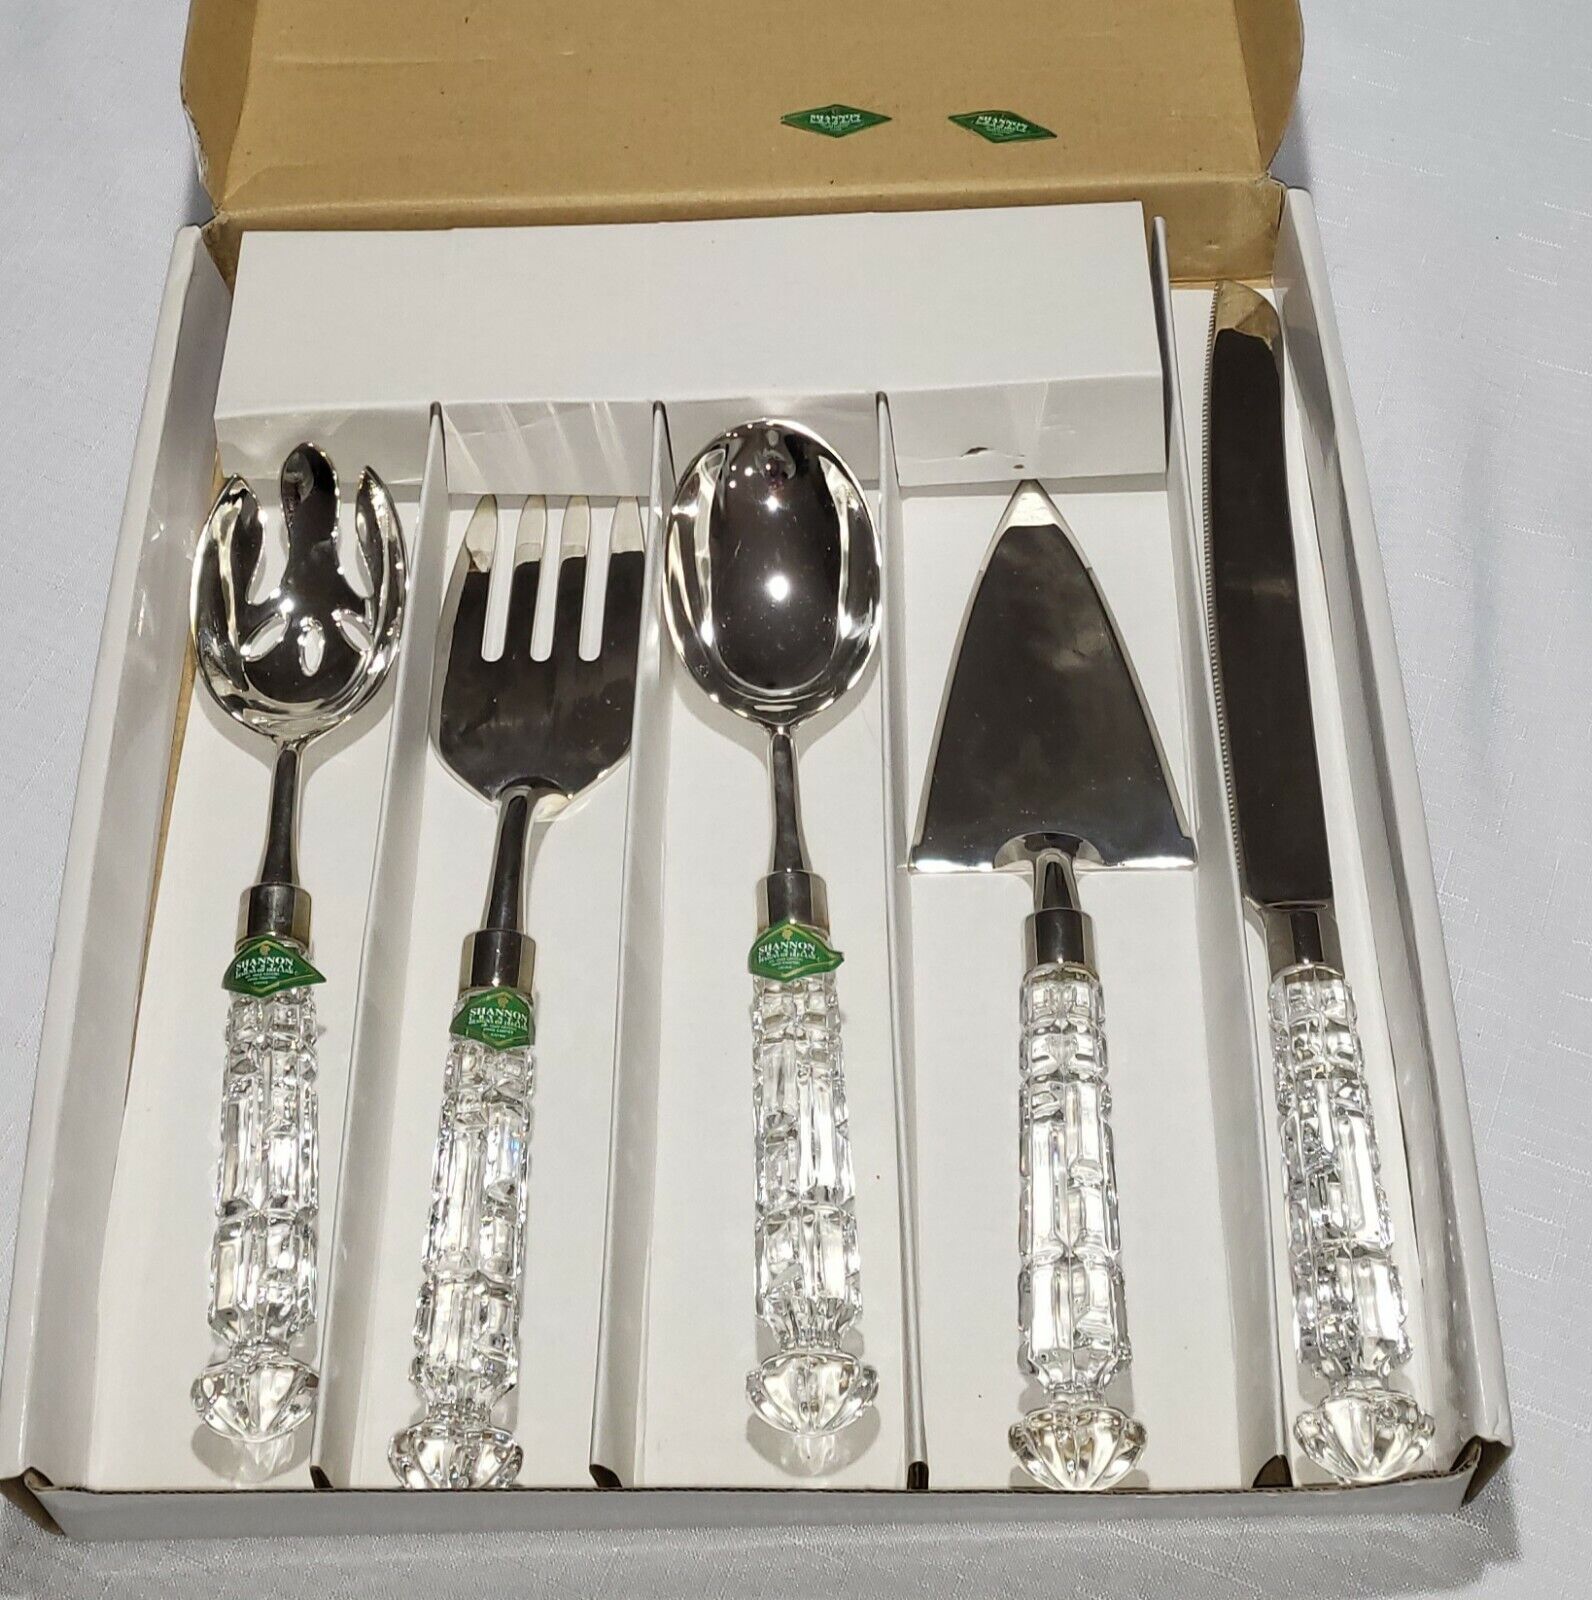 SHANNON Fashion CRYSTAL BY GODINGER VERSAILLES 5 PIECE SET SERVING Selling rankings bo in